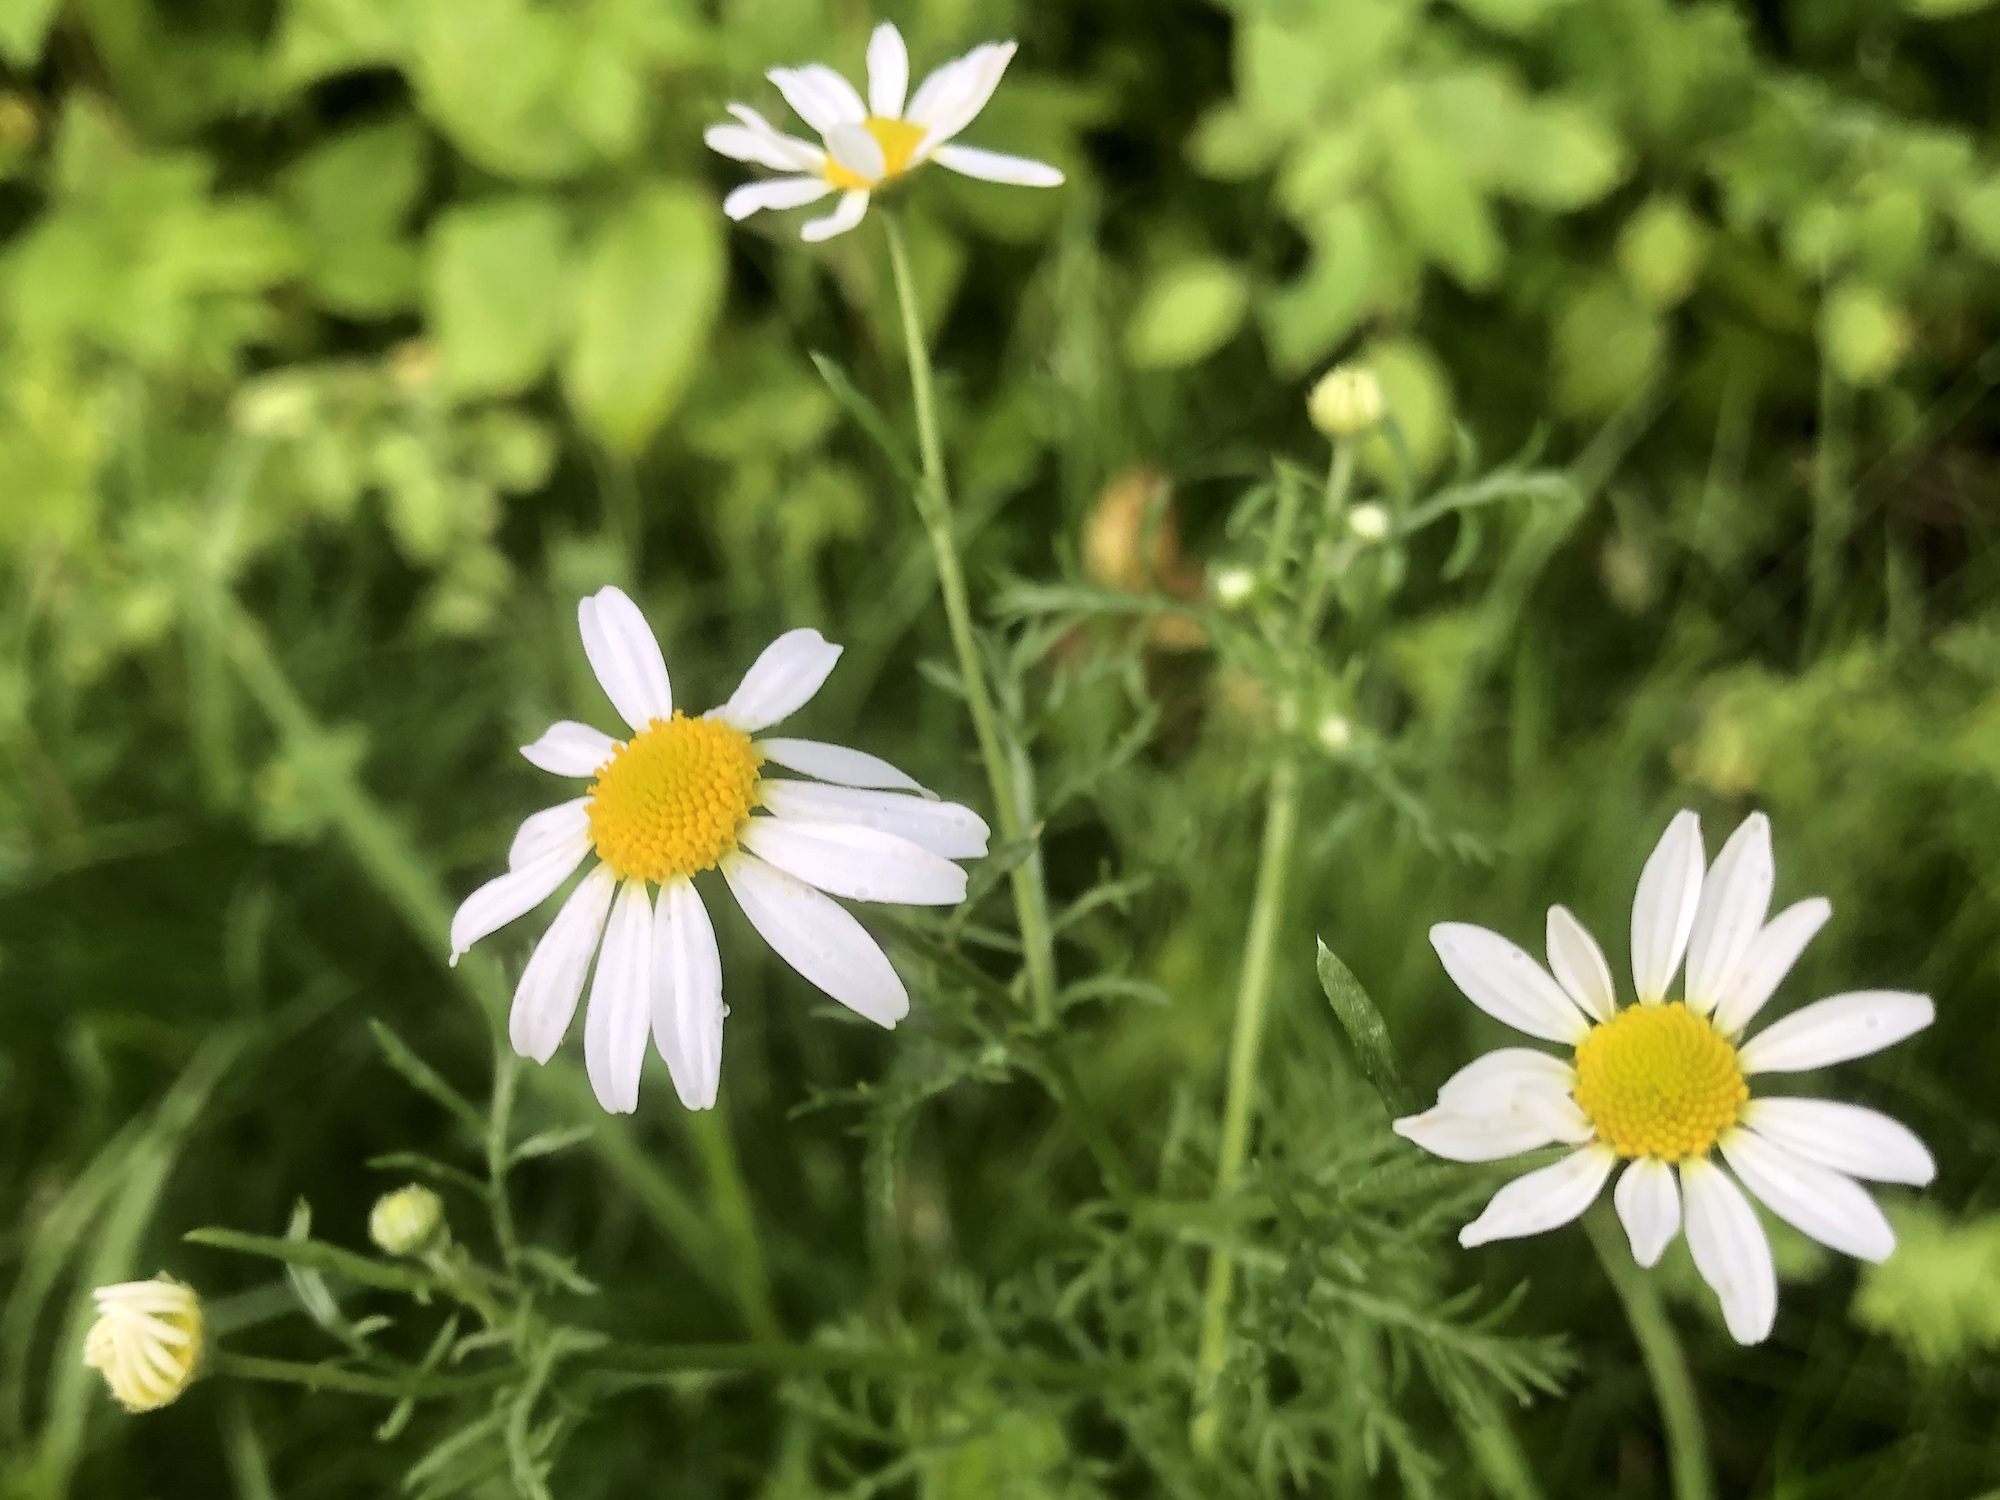 Chamomile in grass between Monroe Street sidewalk and Marion Dunn woods in Madison, Wisconsin on July 2, 2019.